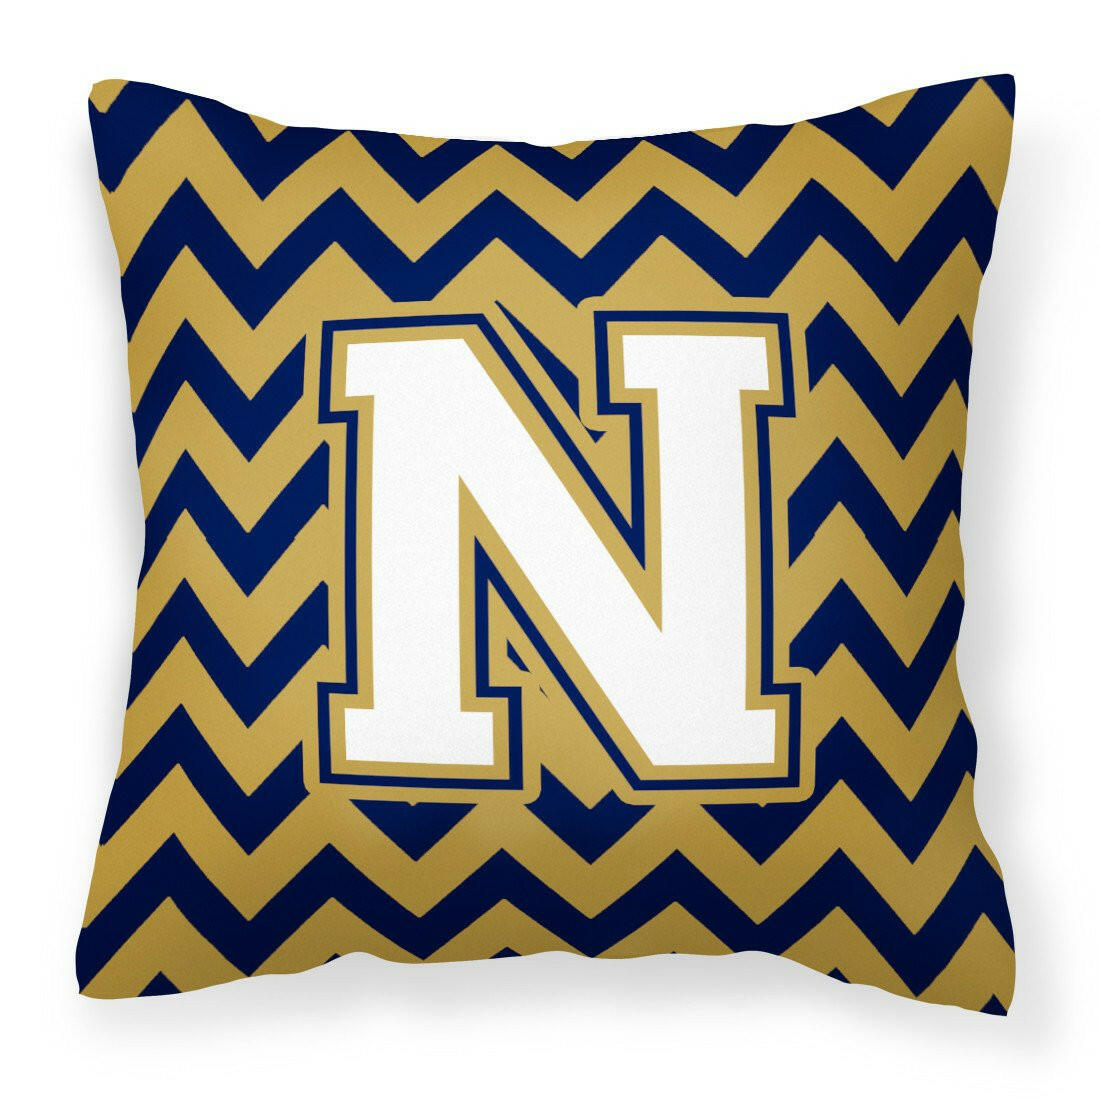 Letter N Chevron Navy Blue and Gold Fabric Decorative Pillow CJ1057-NPW1414 by Caroline's Treasures